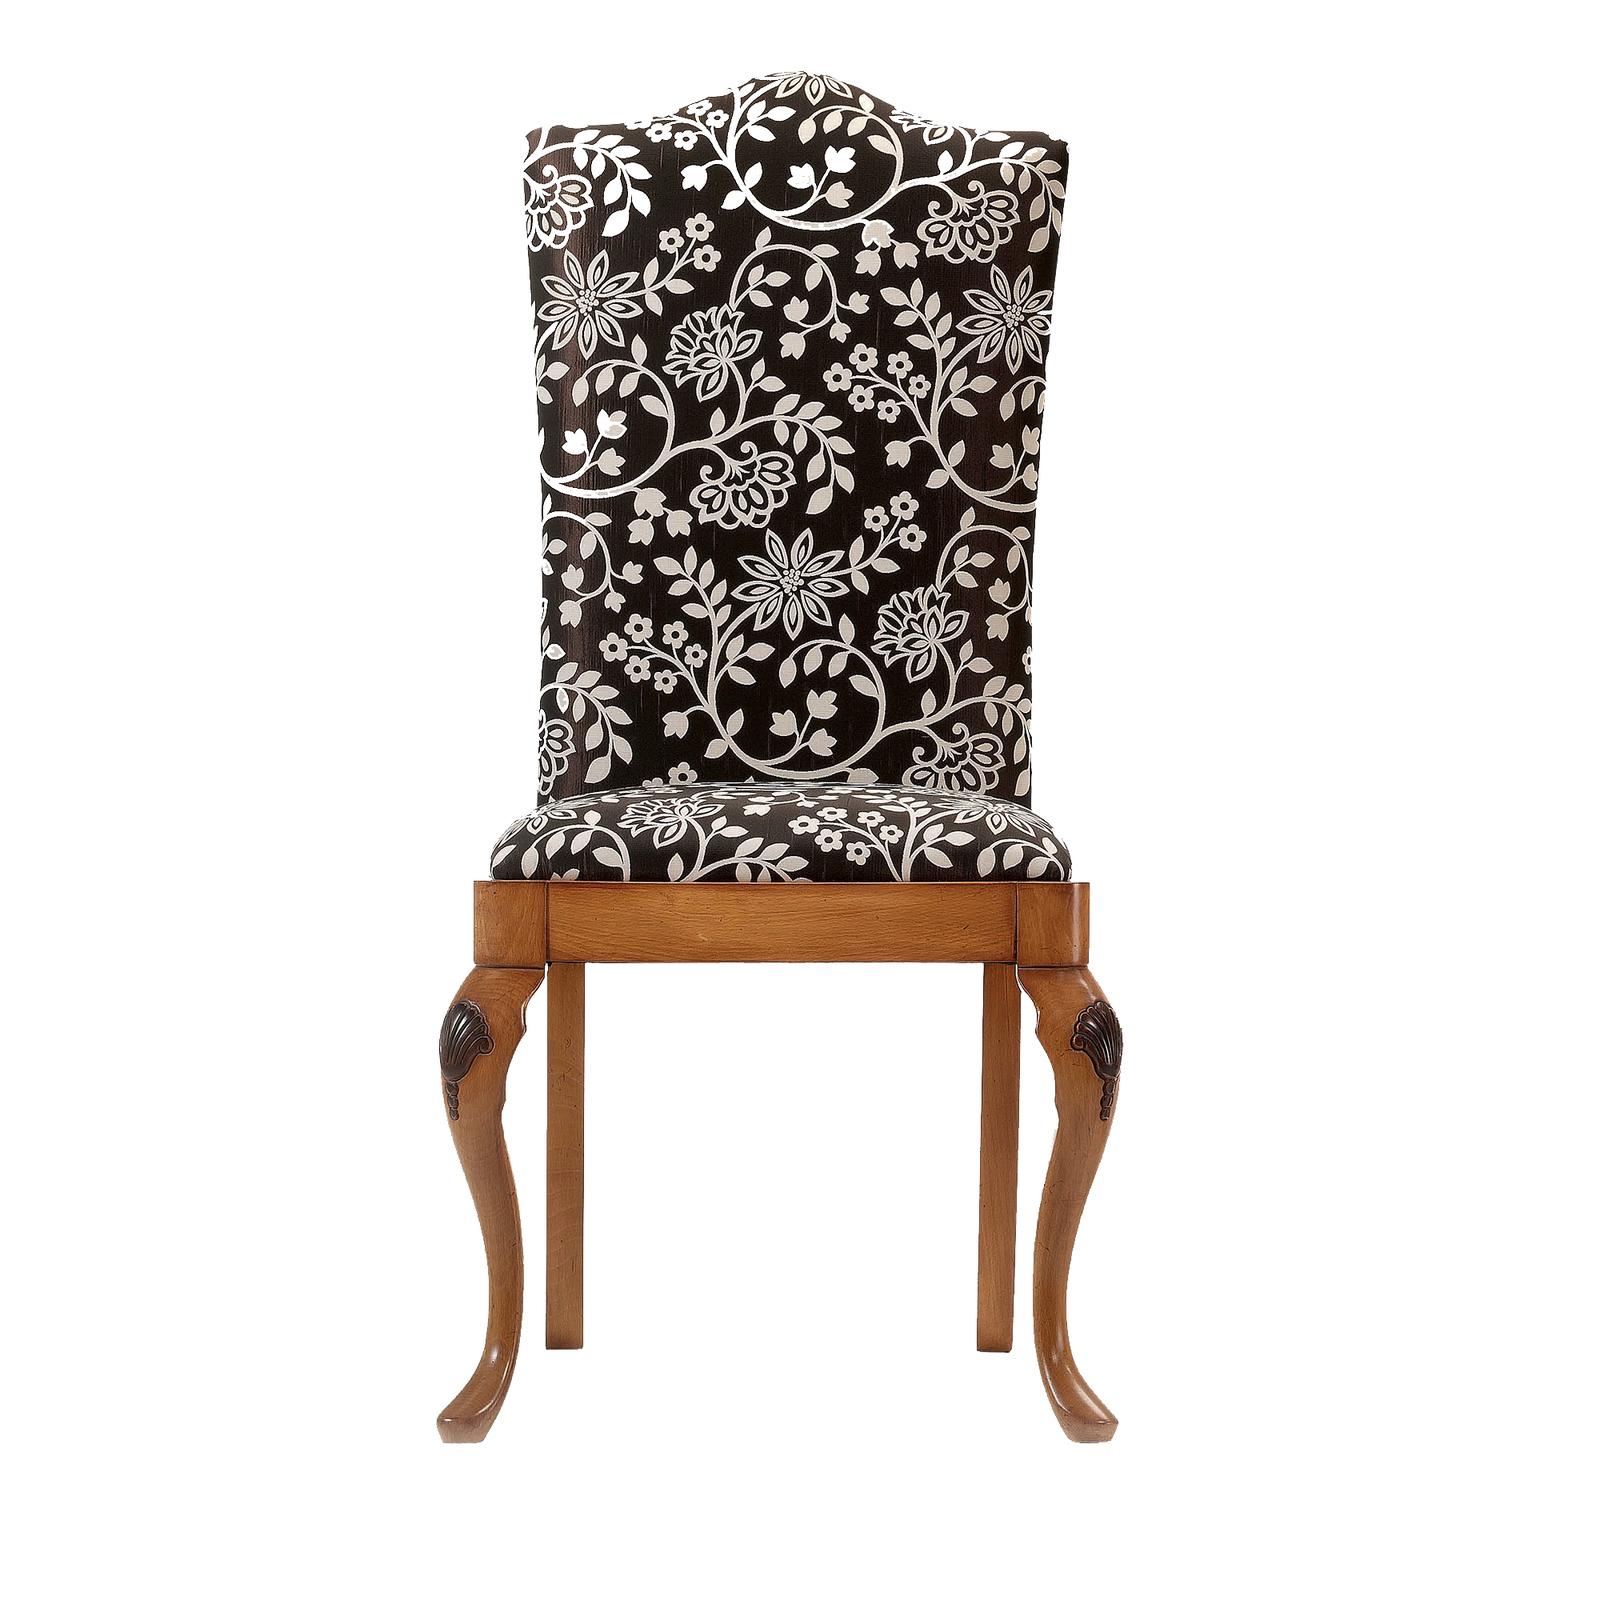 Rococo Black and White Chair